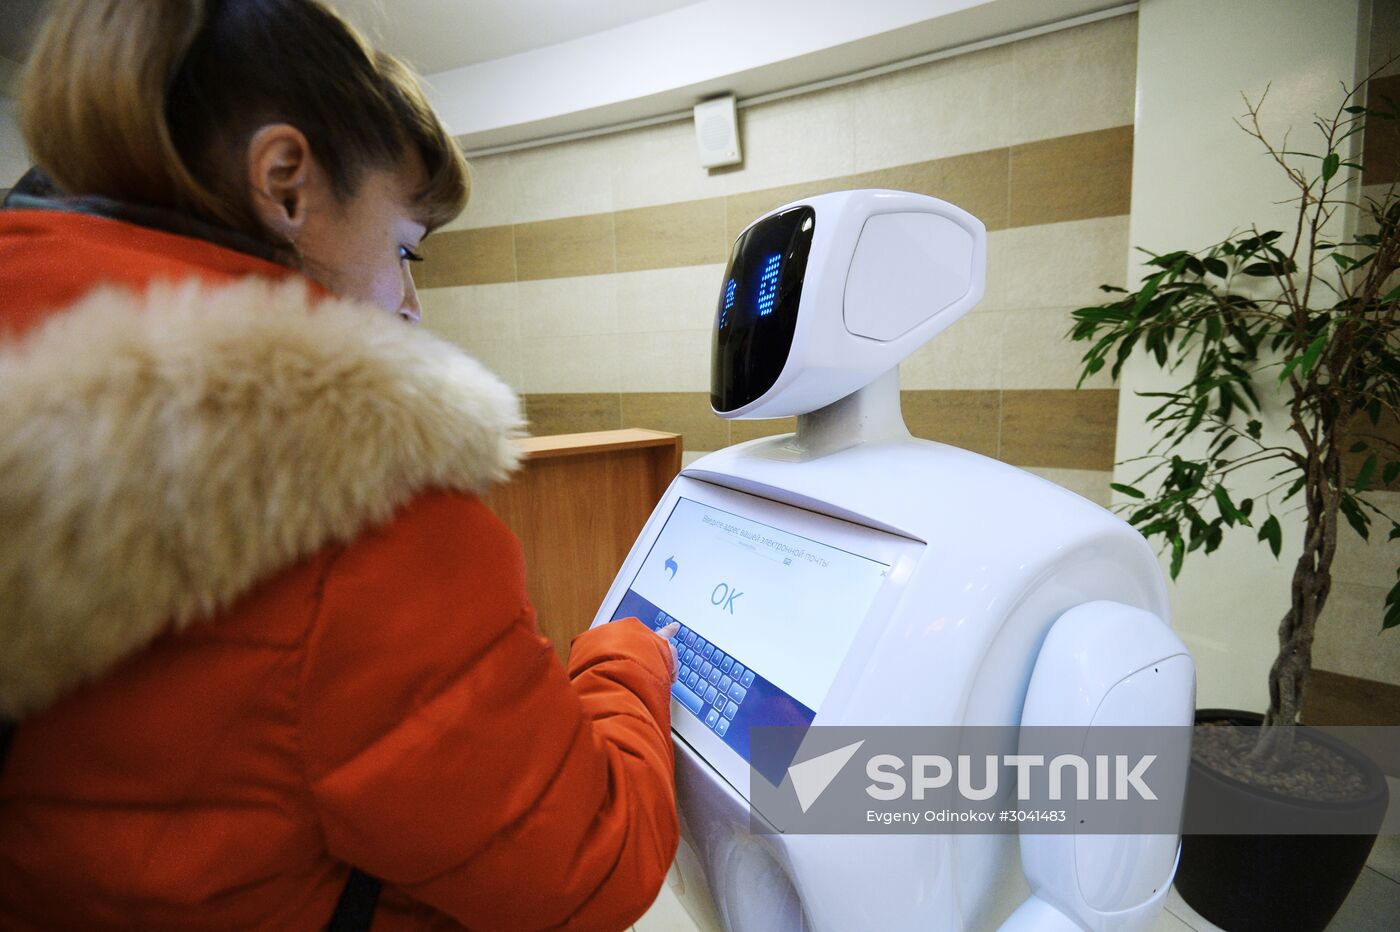 Metrosha assistant robot to operate at Moscow Metro